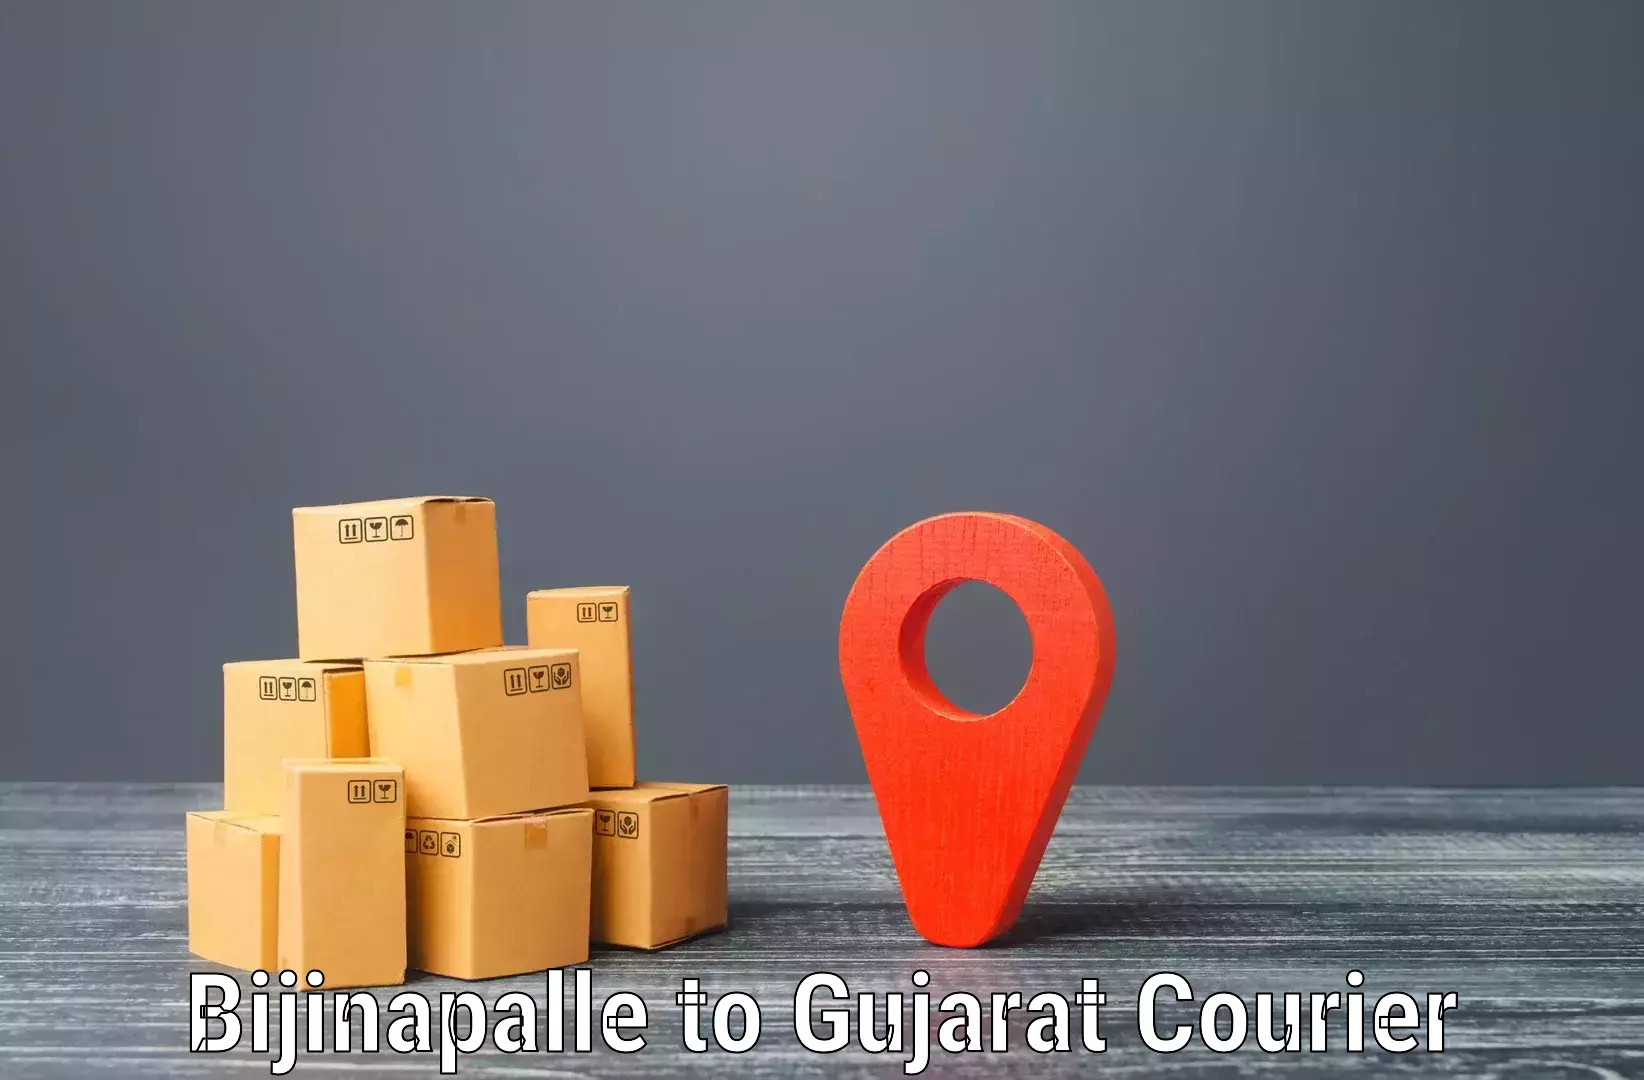 Reliable courier services Bijinapalle to GIDC